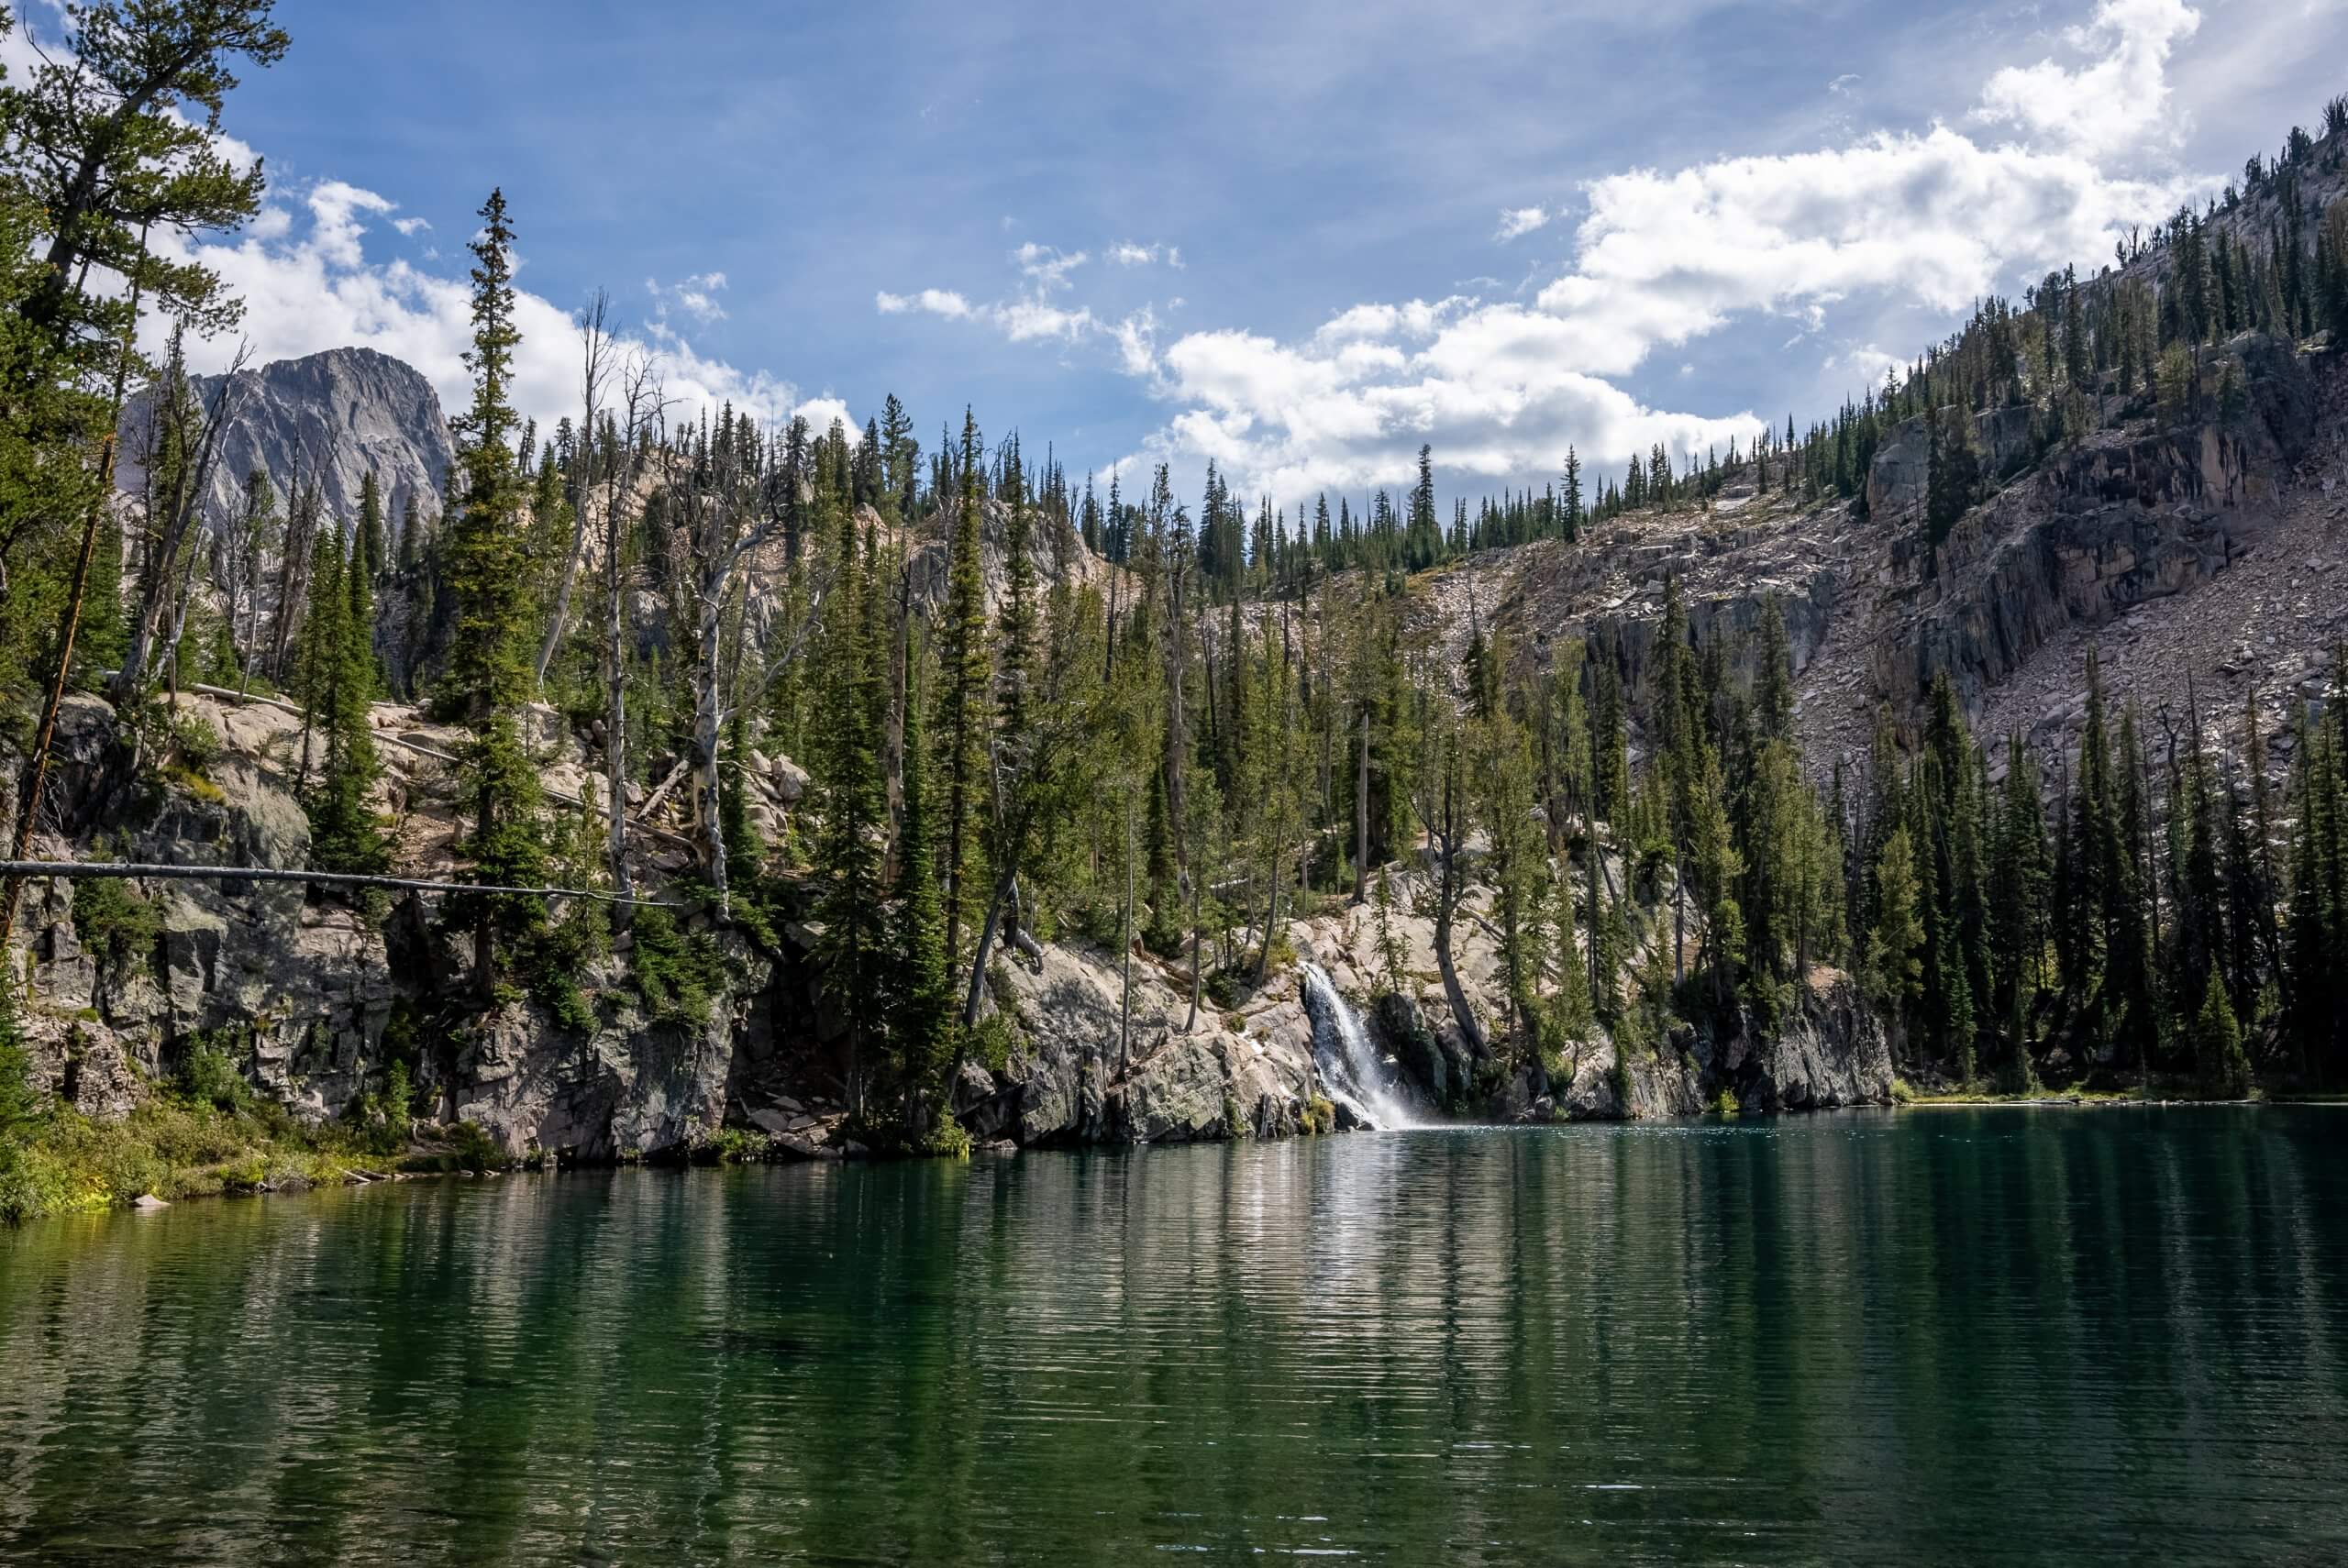 A view of Middle Cramer Lake surrounded by tree-covered mountains in the Sawtooth Wilderness.